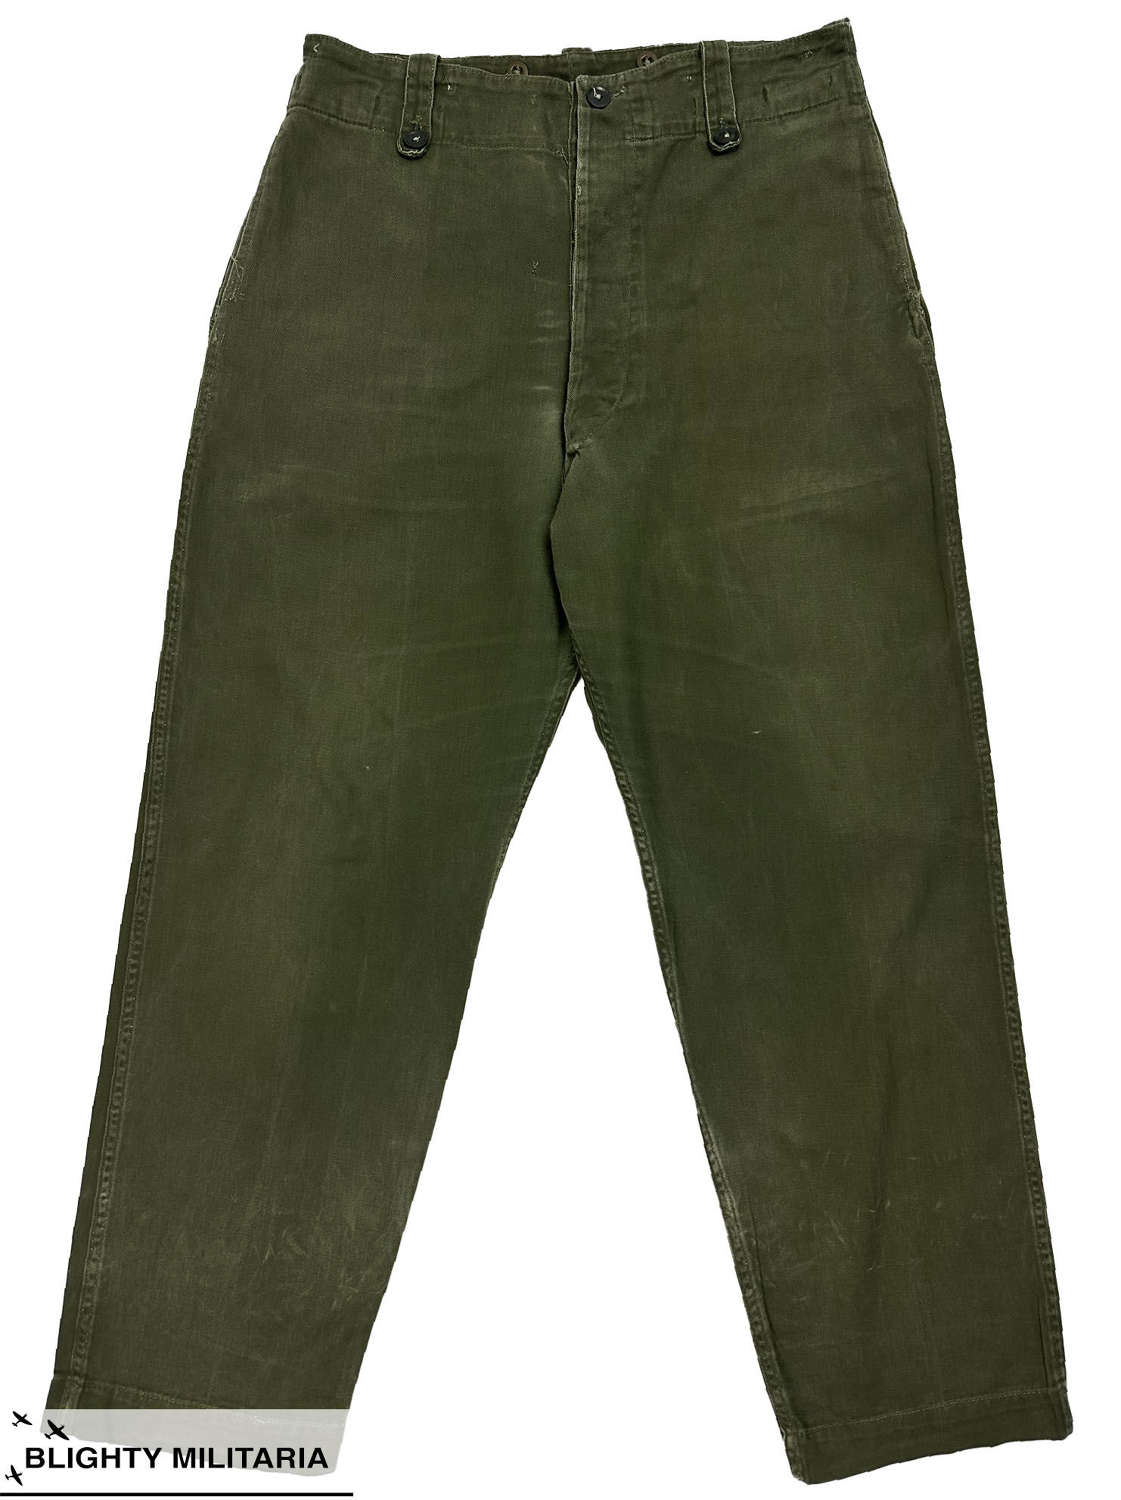 Original 1966 Dated British Army Overall Green Trousers - Size 6 36x31